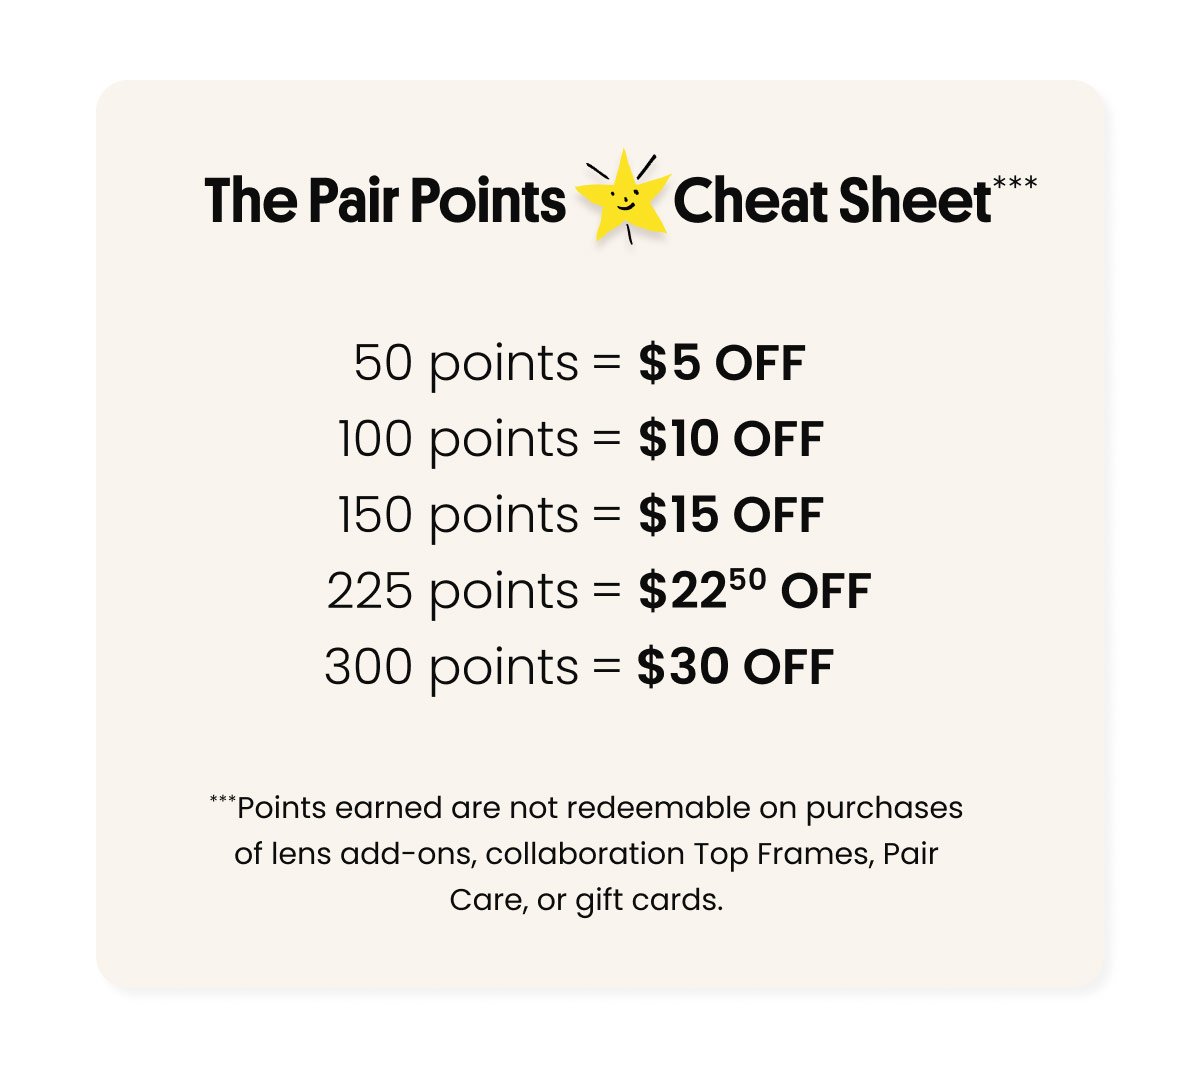 The Pair Points Cheat Sheet